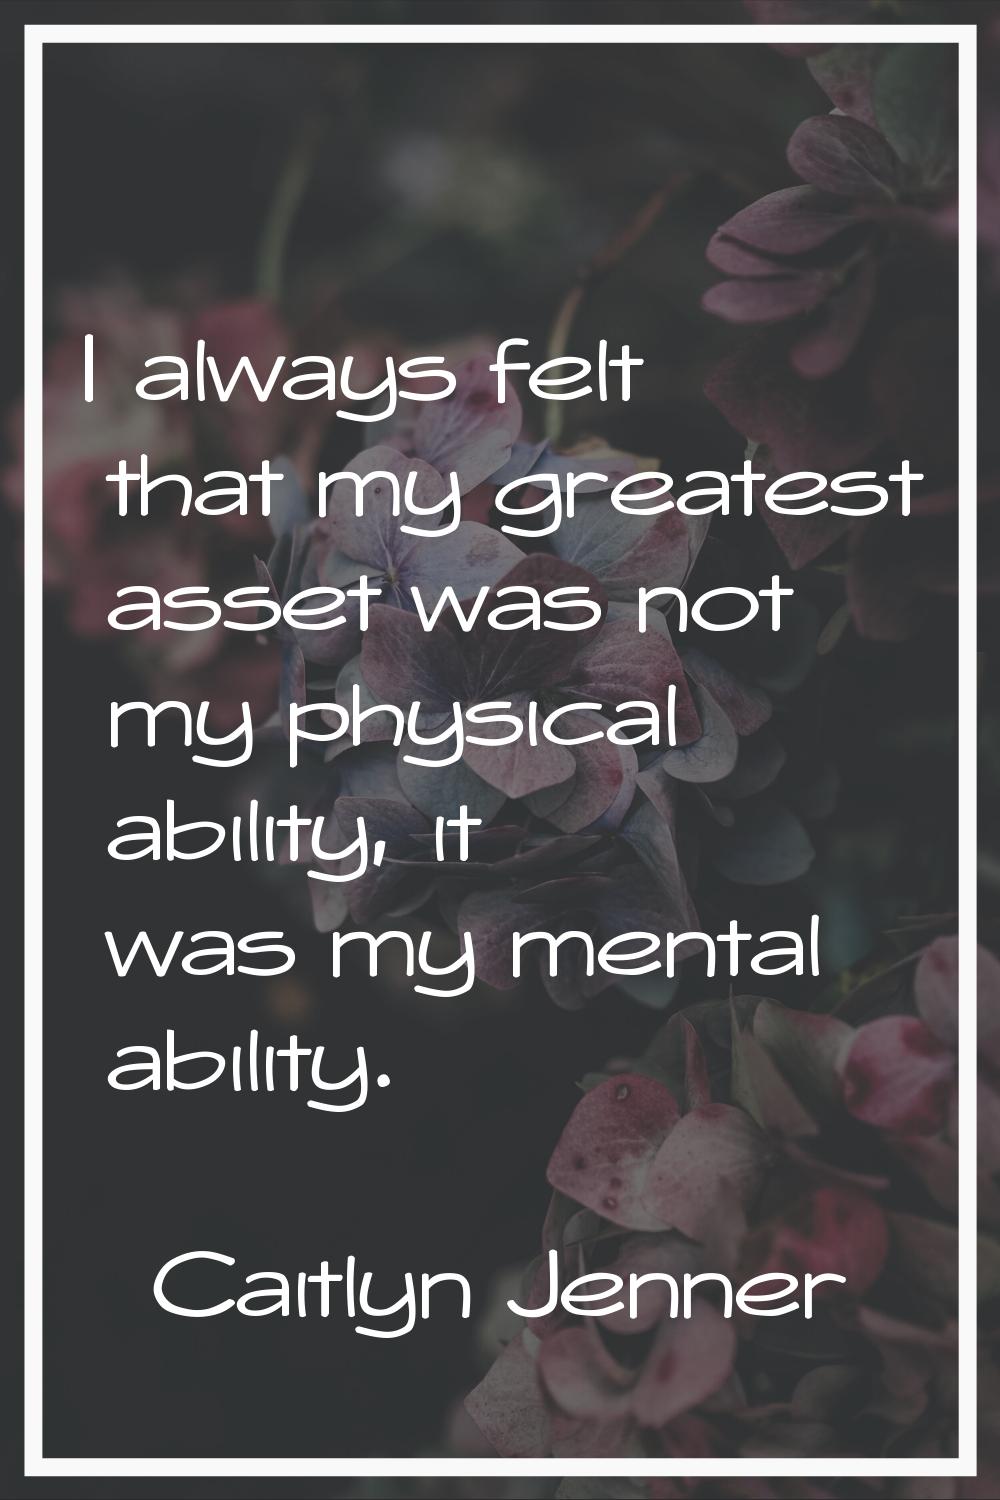 I always felt that my greatest asset was not my physical ability, it was my mental ability.